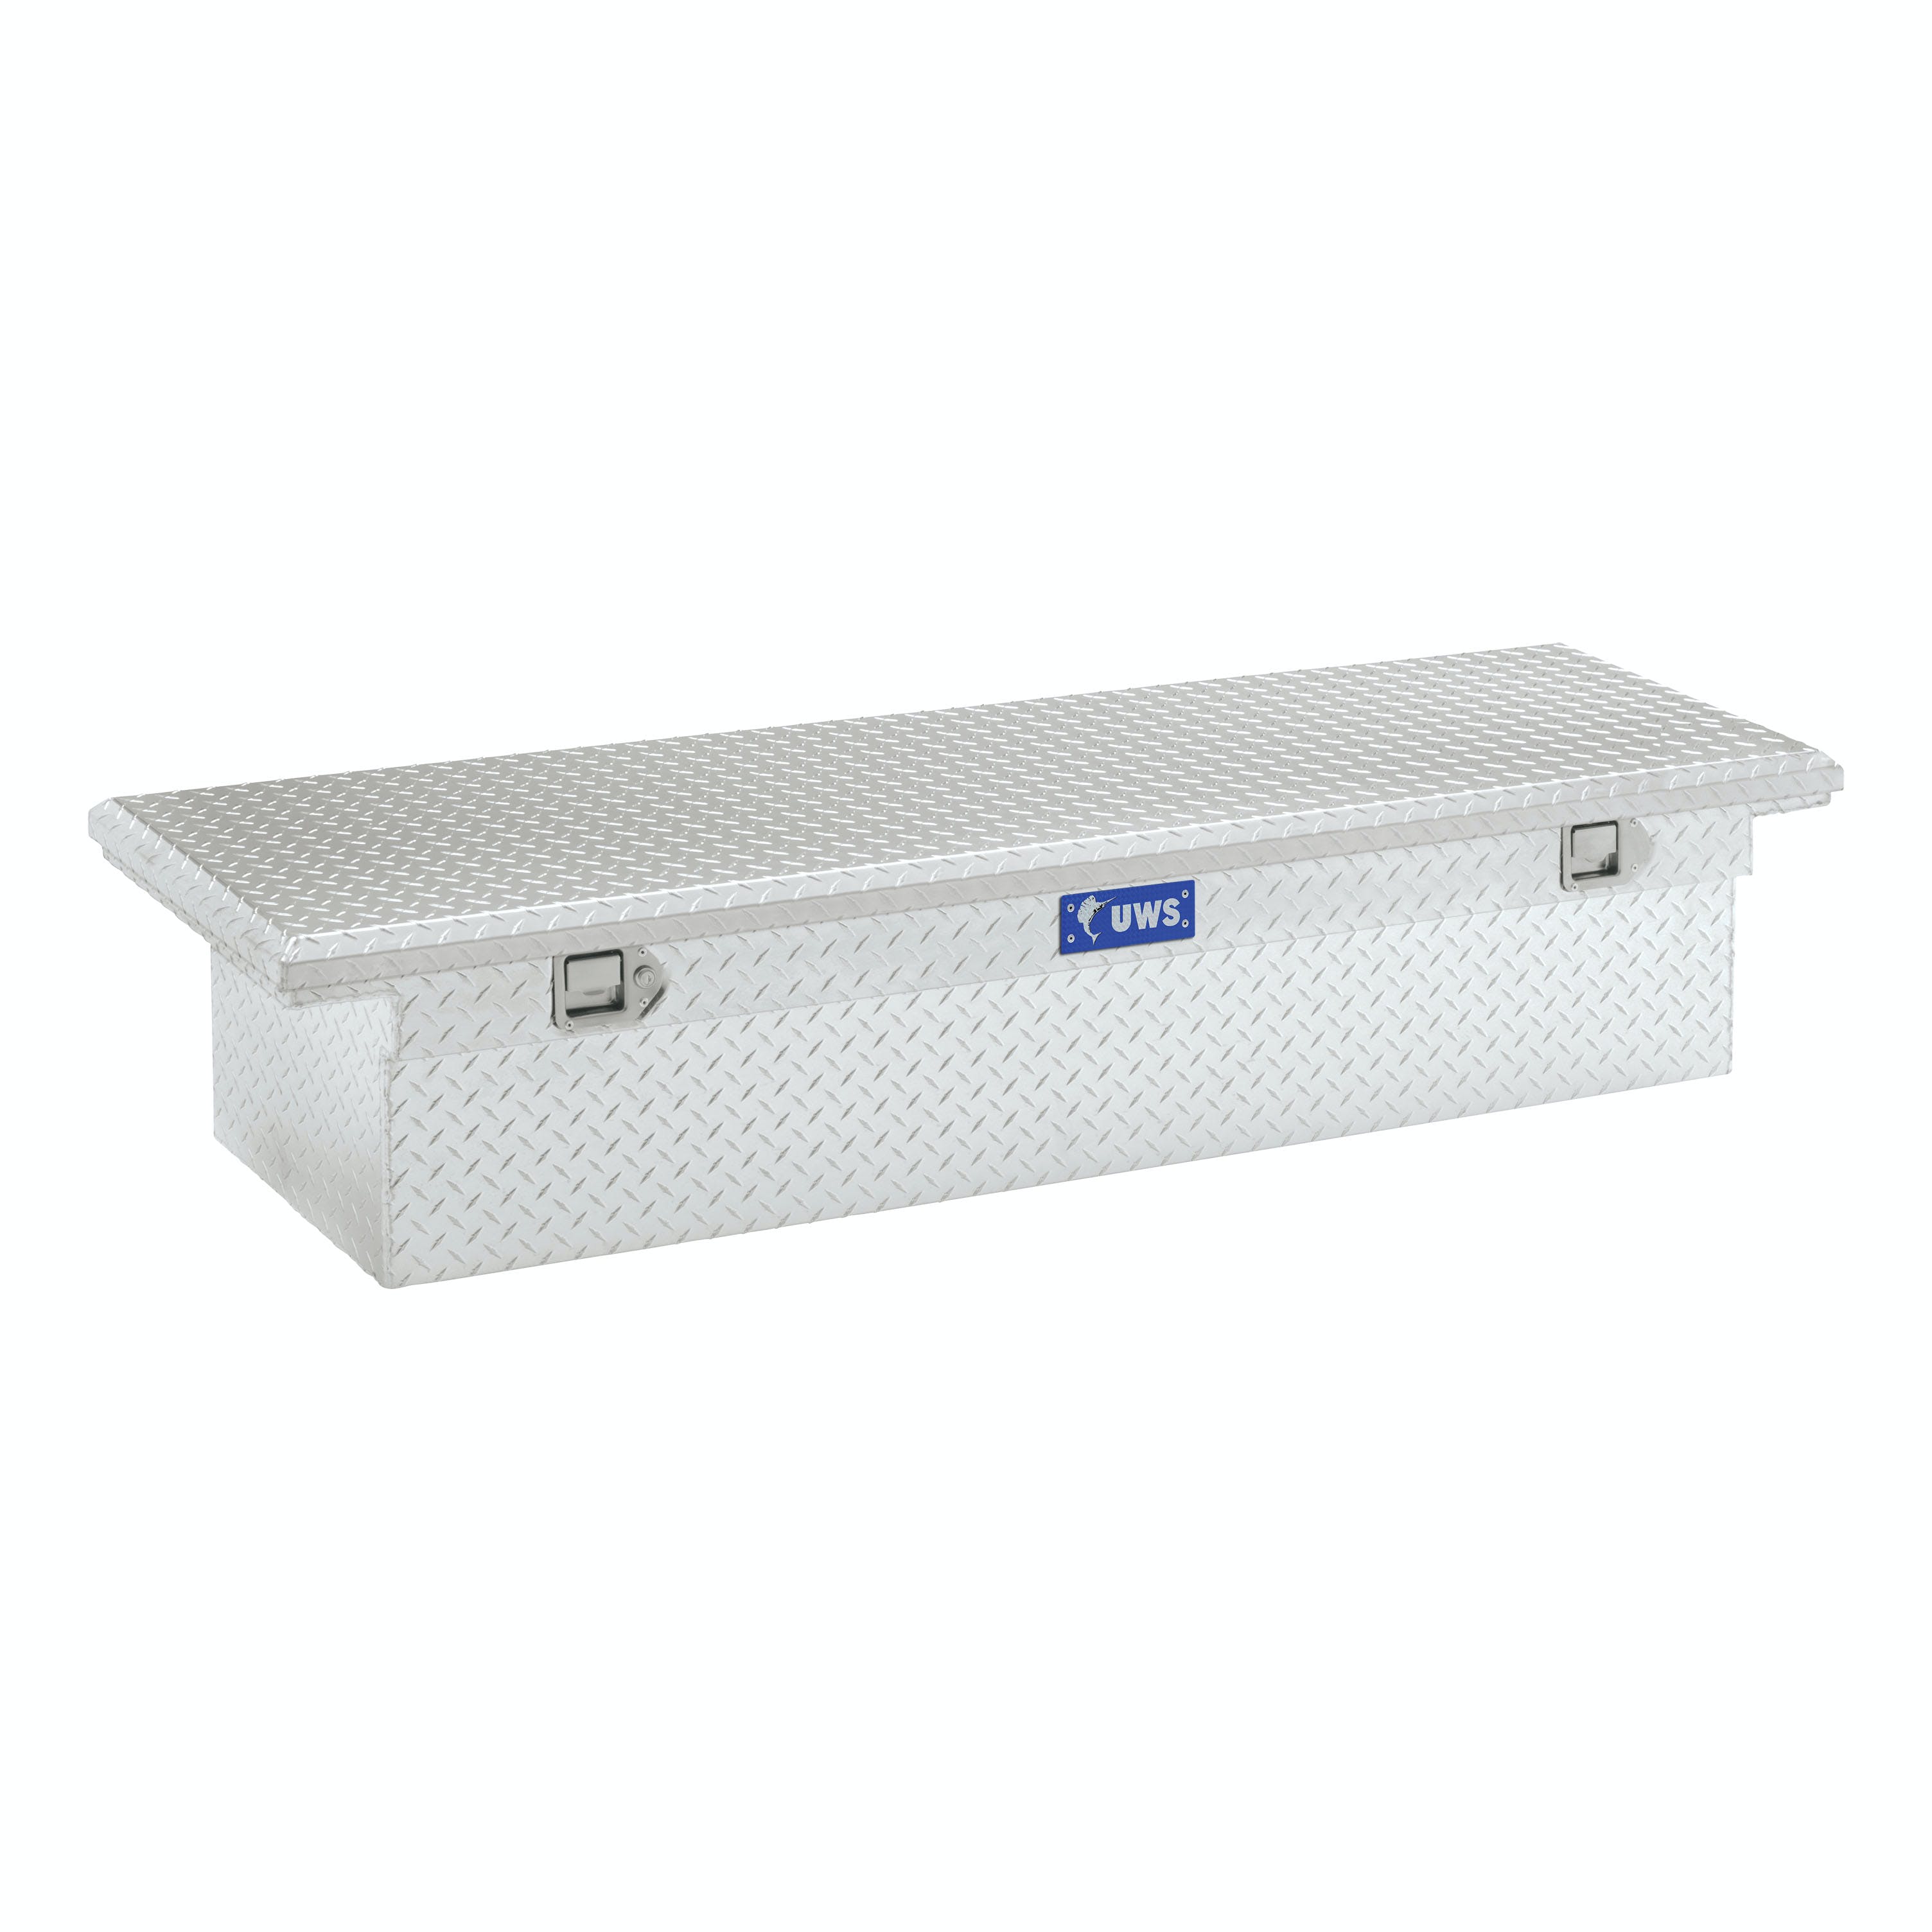 UWS TBS-69-LP 69 inch Aluminum Single Lid Crossover Toolbox Low Profile